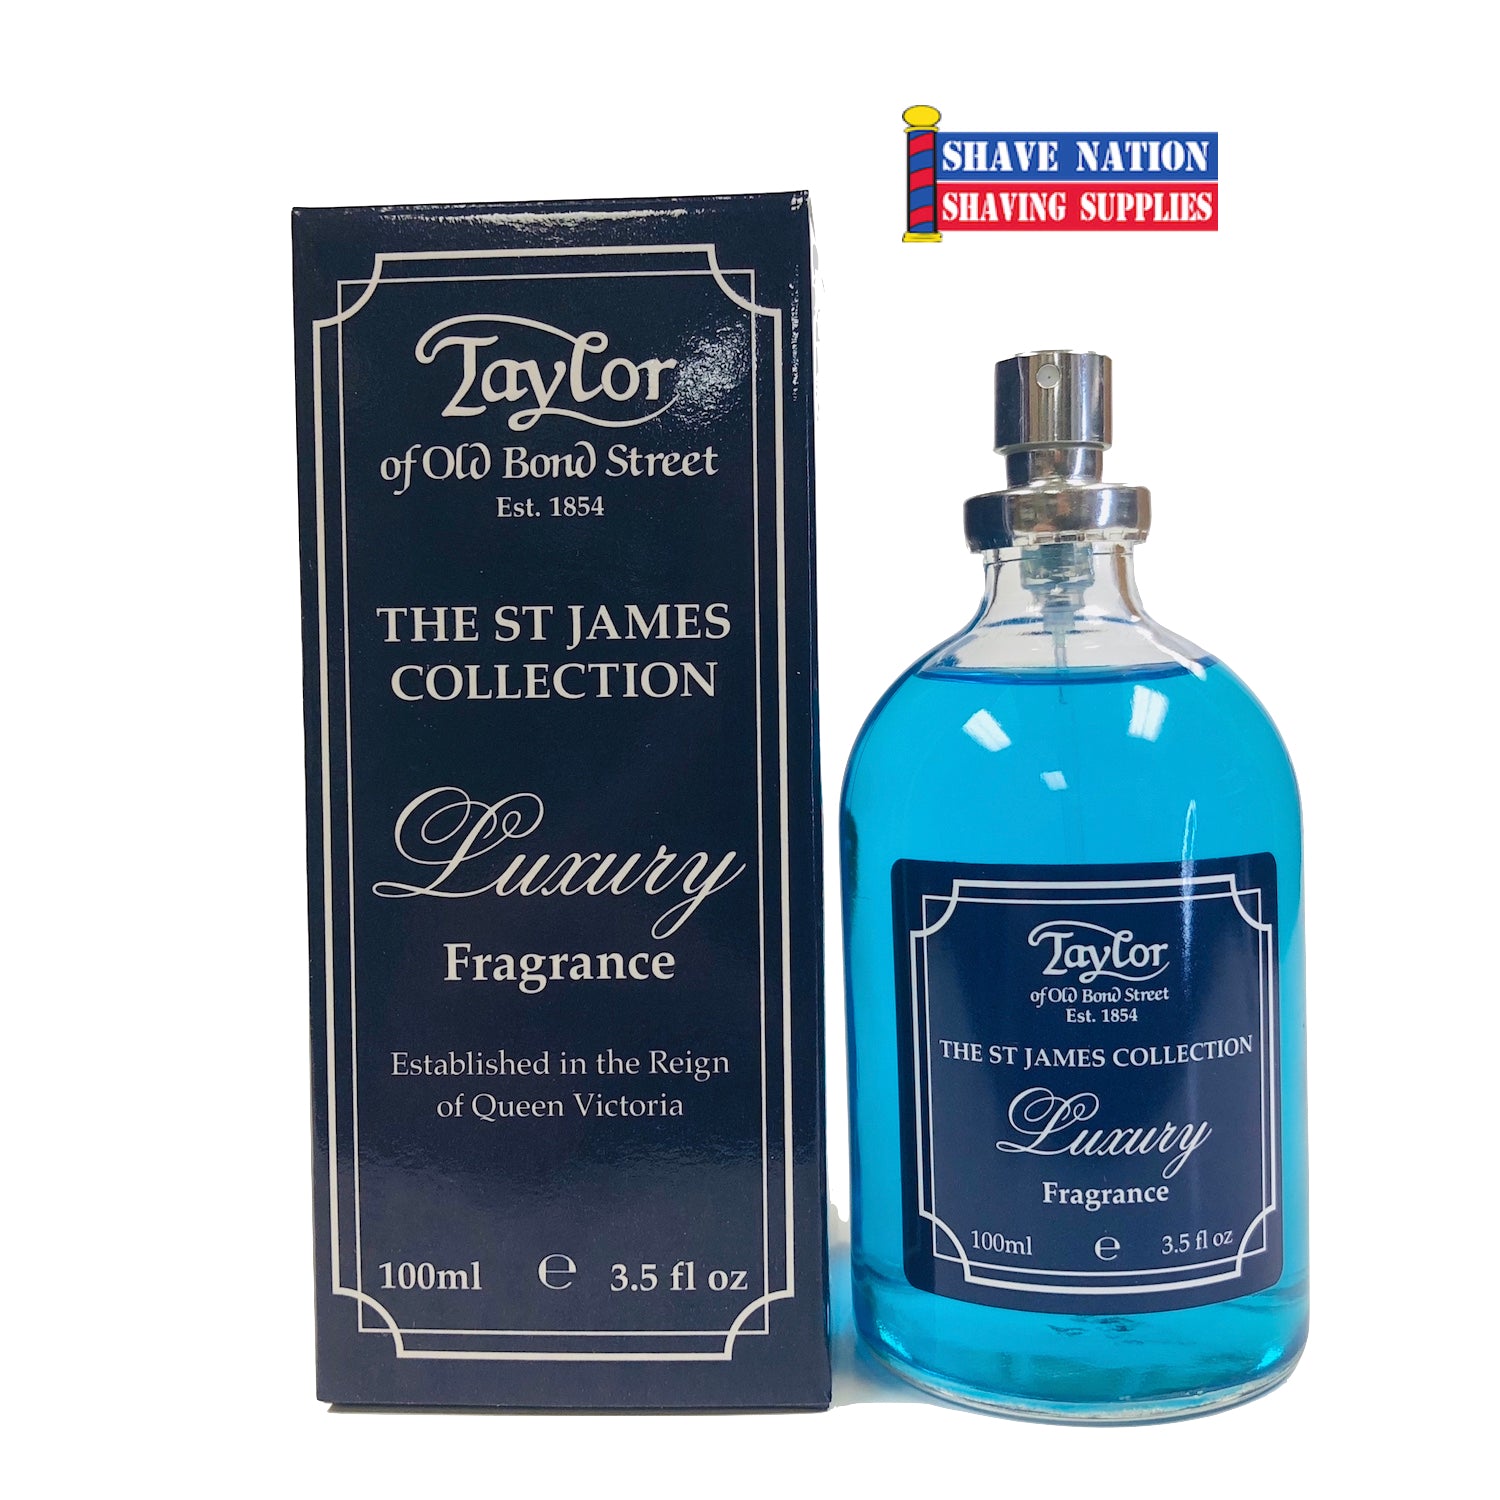 of Shave The Shaving Taylor Street Nation Collection Saint Supplies® James Fragrance Bond Old | Luxury